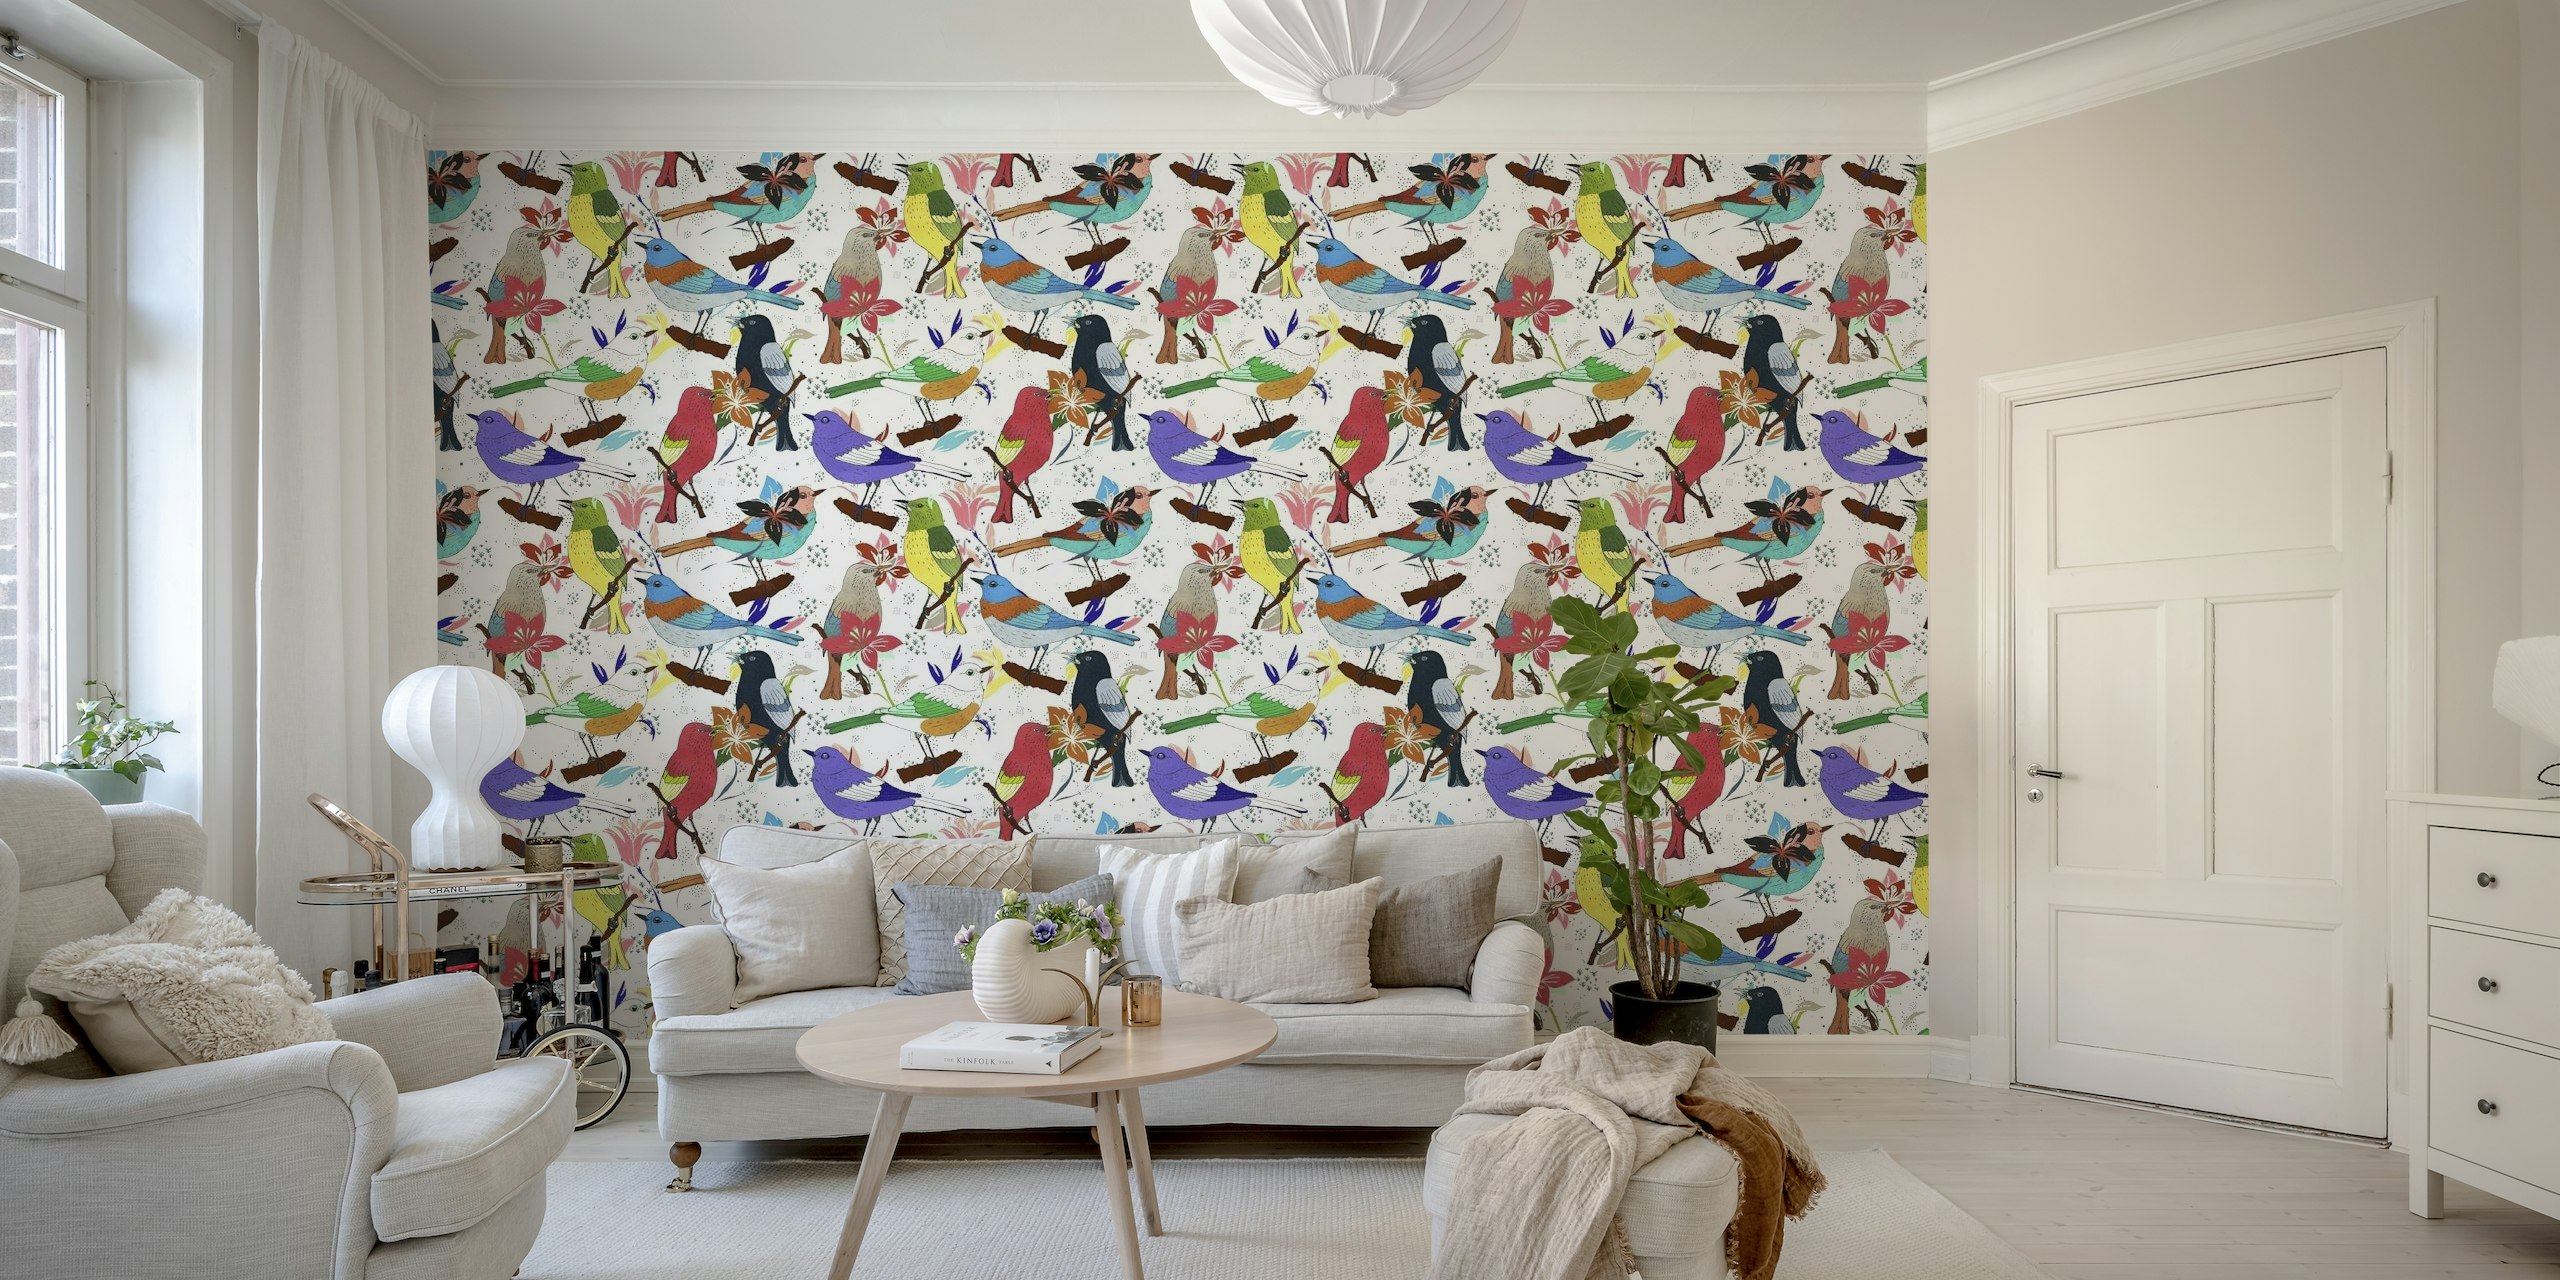 Maximalistic pattern of colorful birds behang